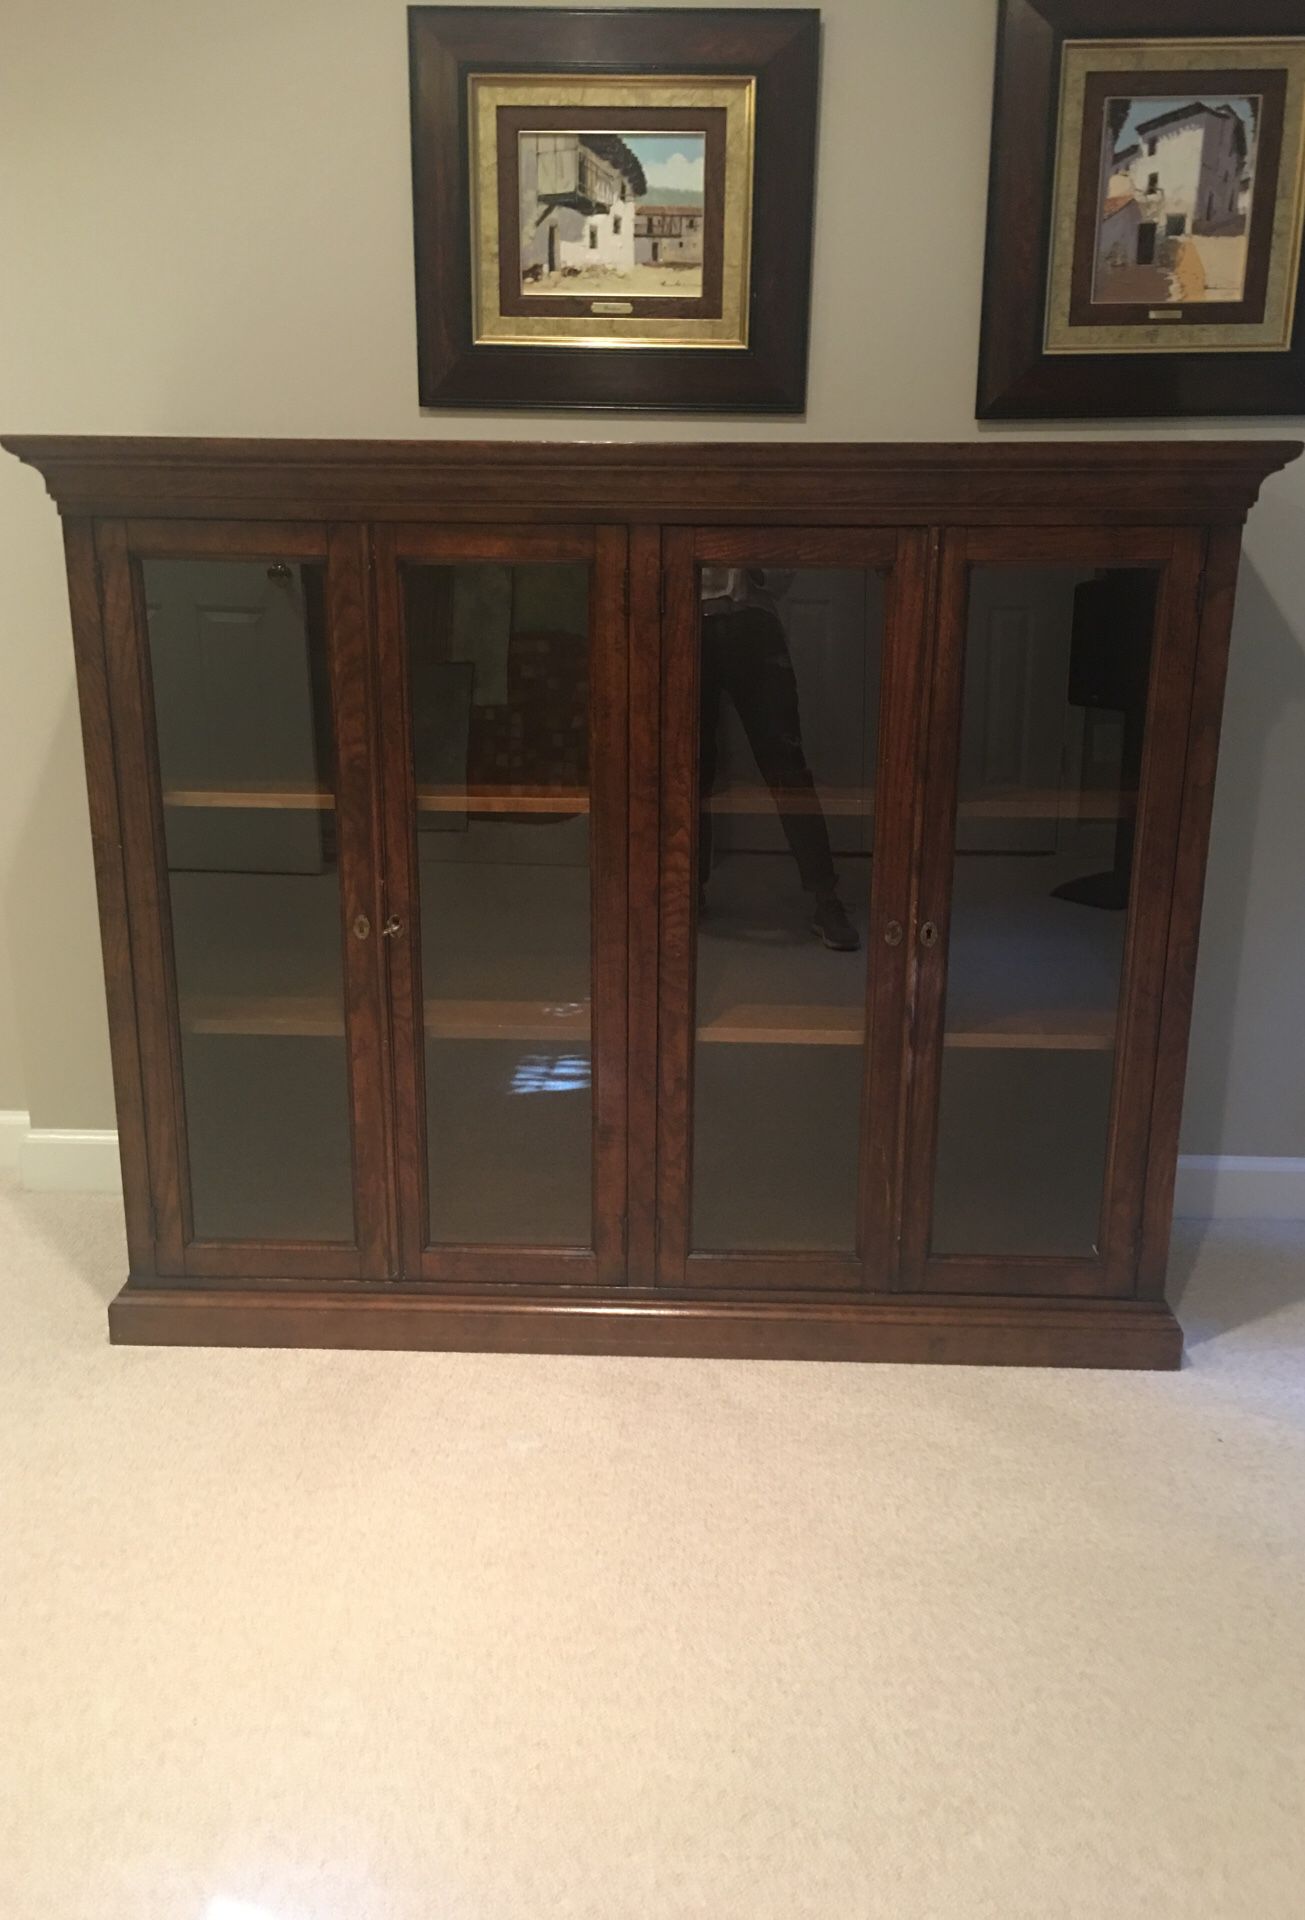 ‘Crate and Barrel rustic display cabinet good condition